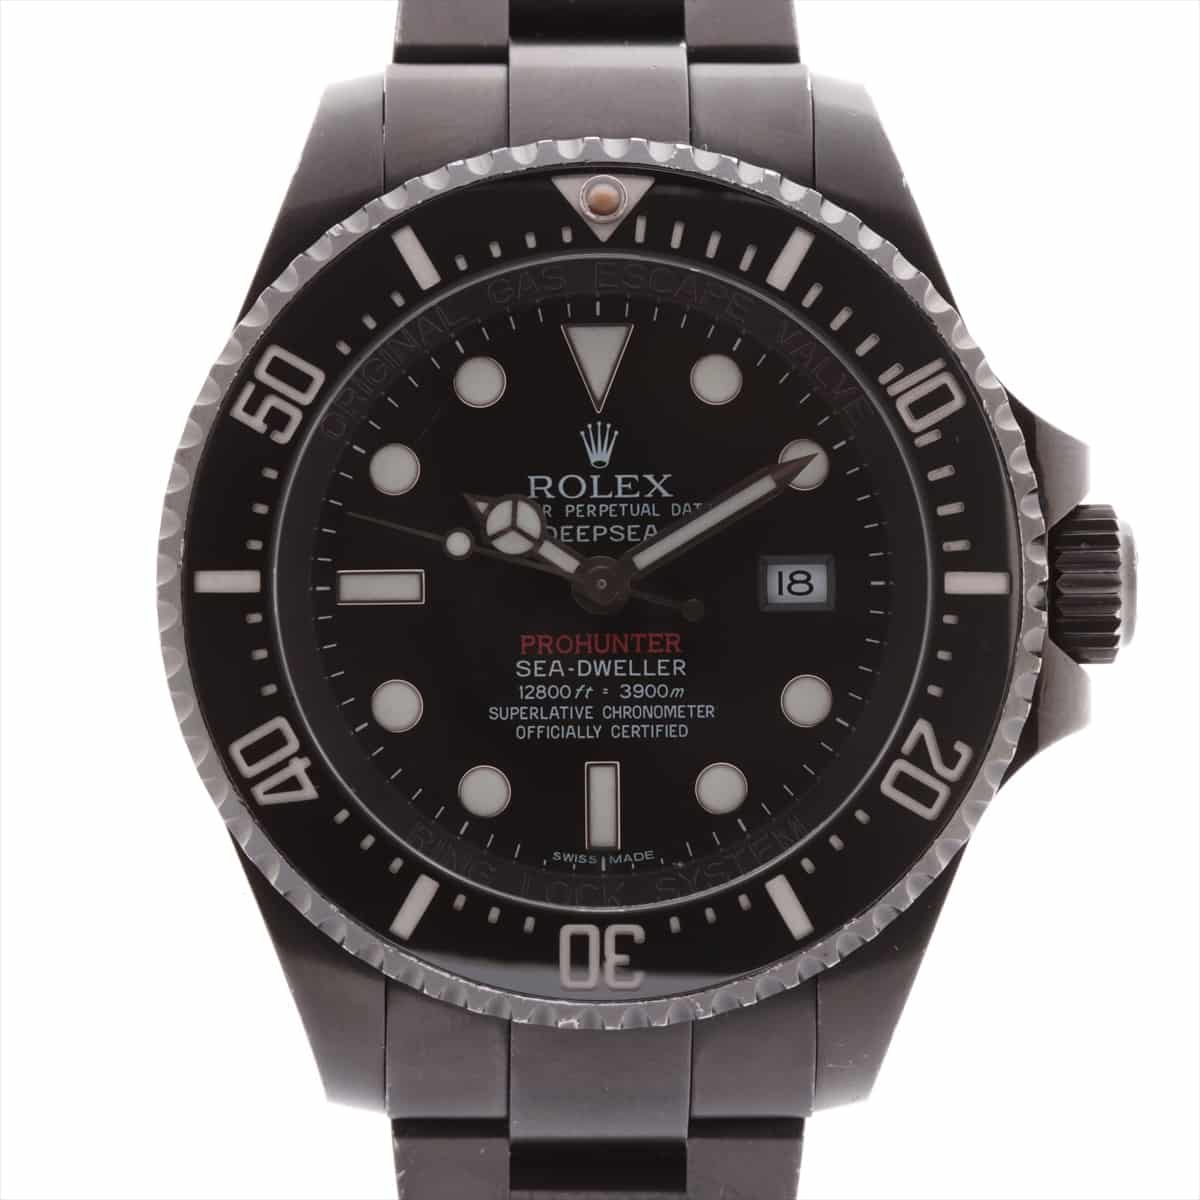 Rolex Sea-Dweller Deep Sea Pro-Hunter 116660 V number SS AT Black-Face Luminous discoloration needle center wound